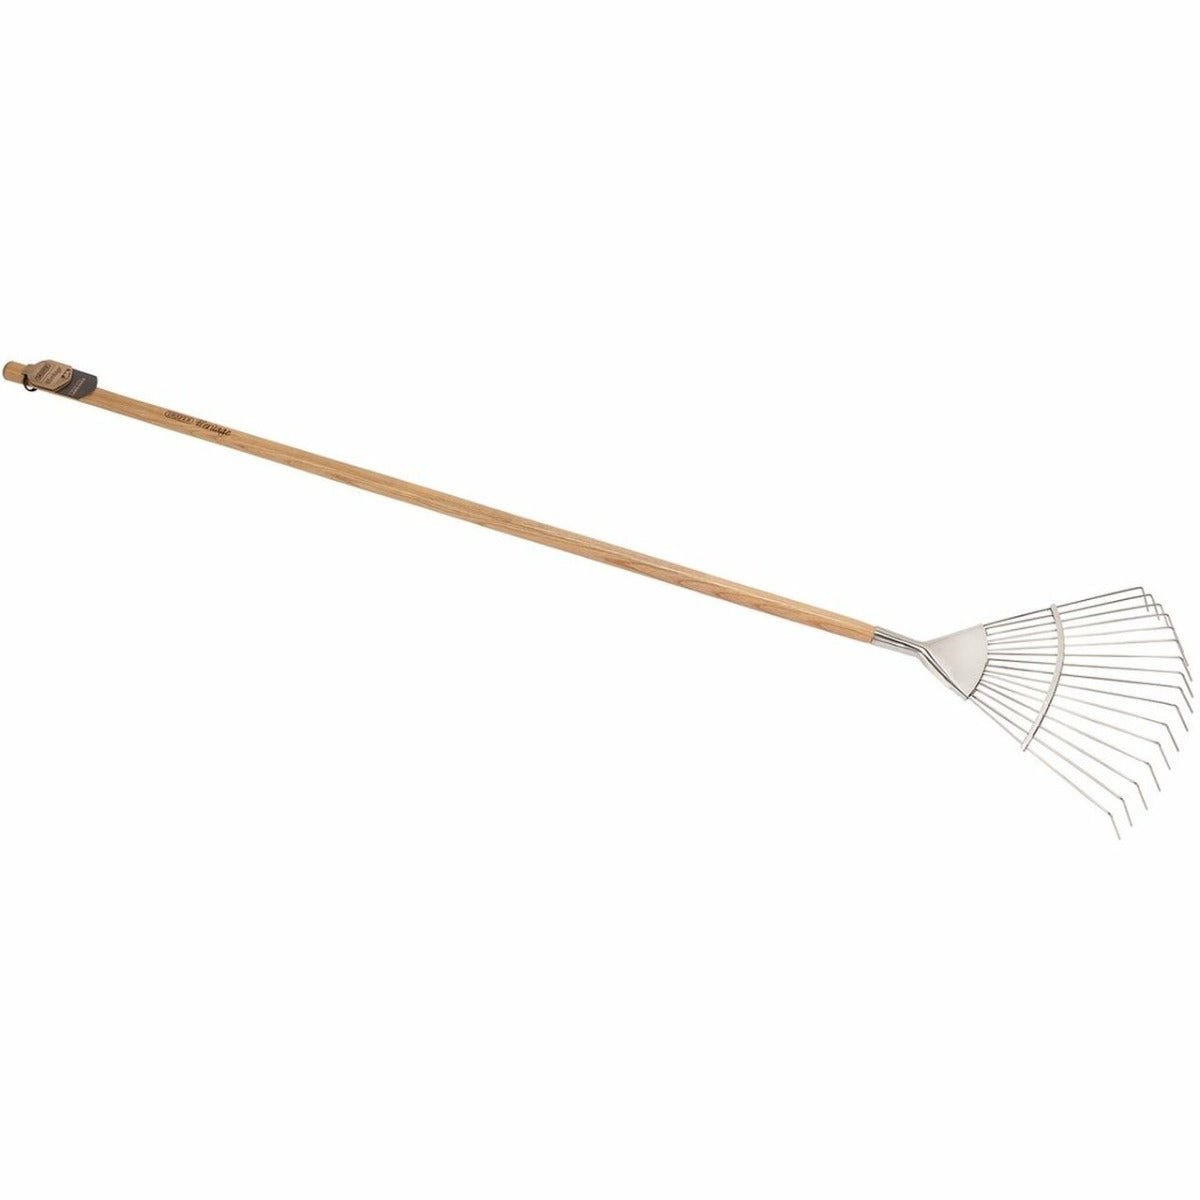 Draper 99020 Heritage Stainless Steel Lawn Rake with Ash Handle